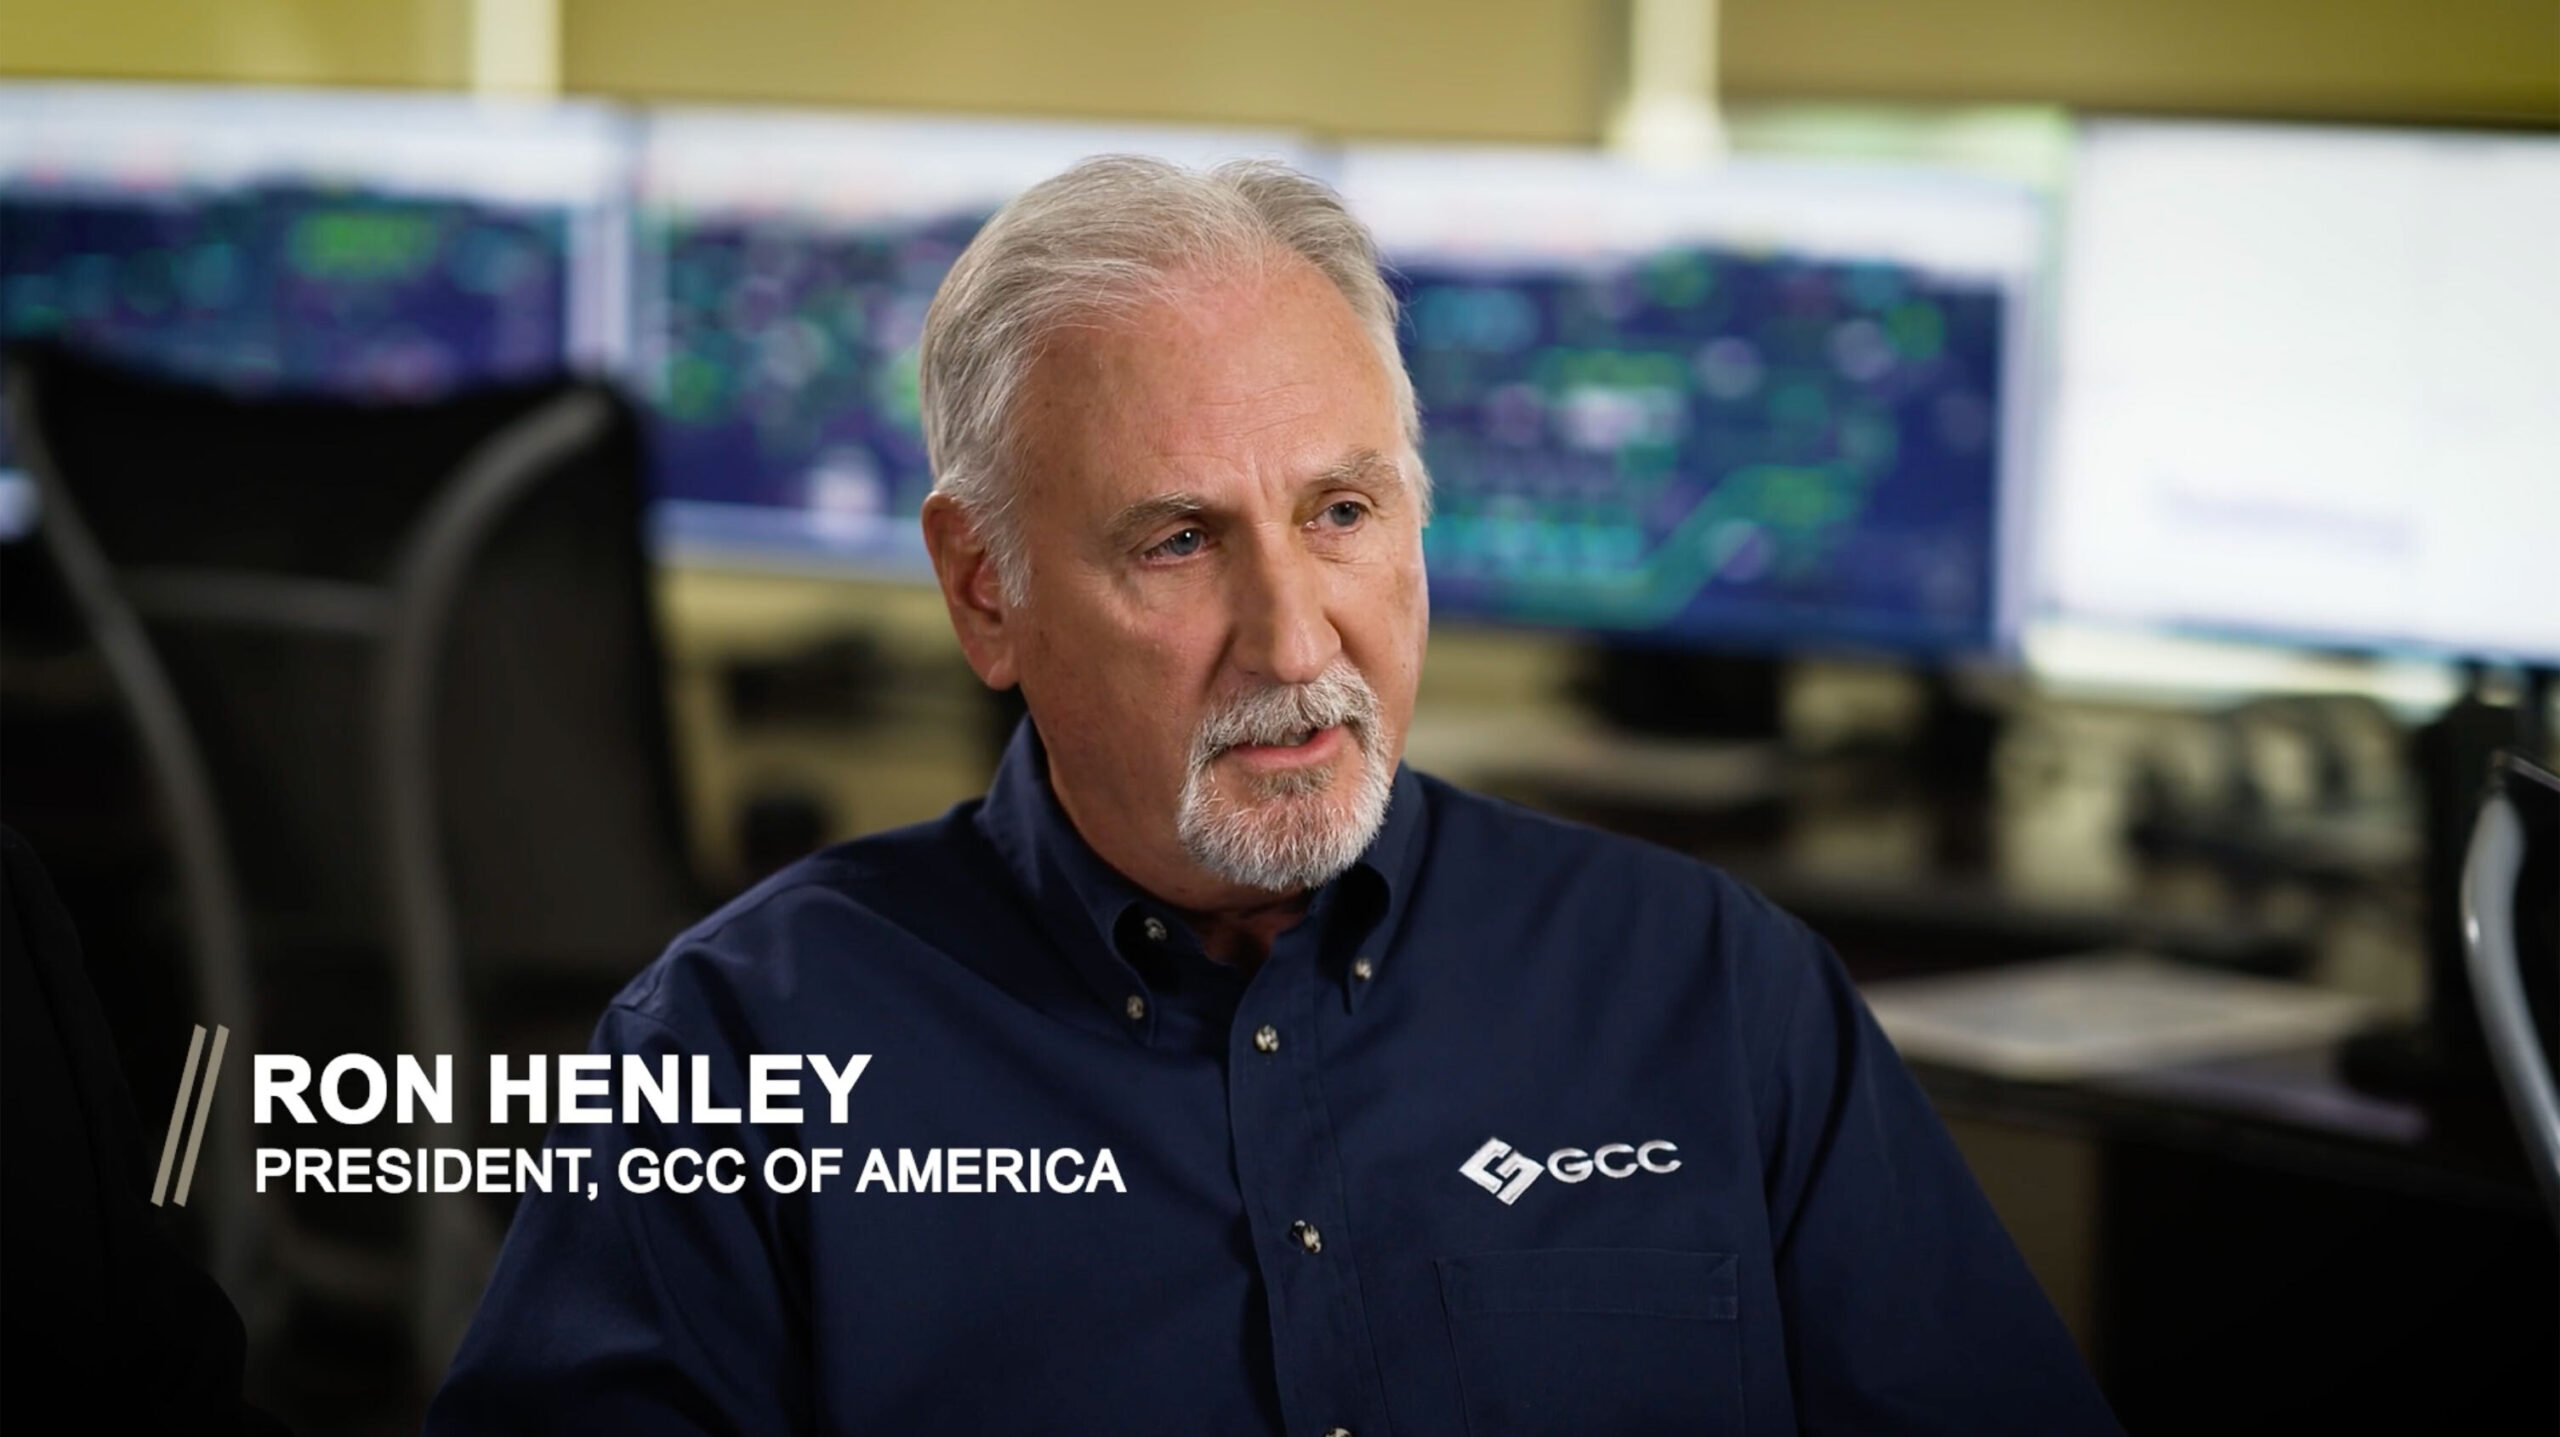 Ron Henley of GCC of America – On the Road with the Roadmap